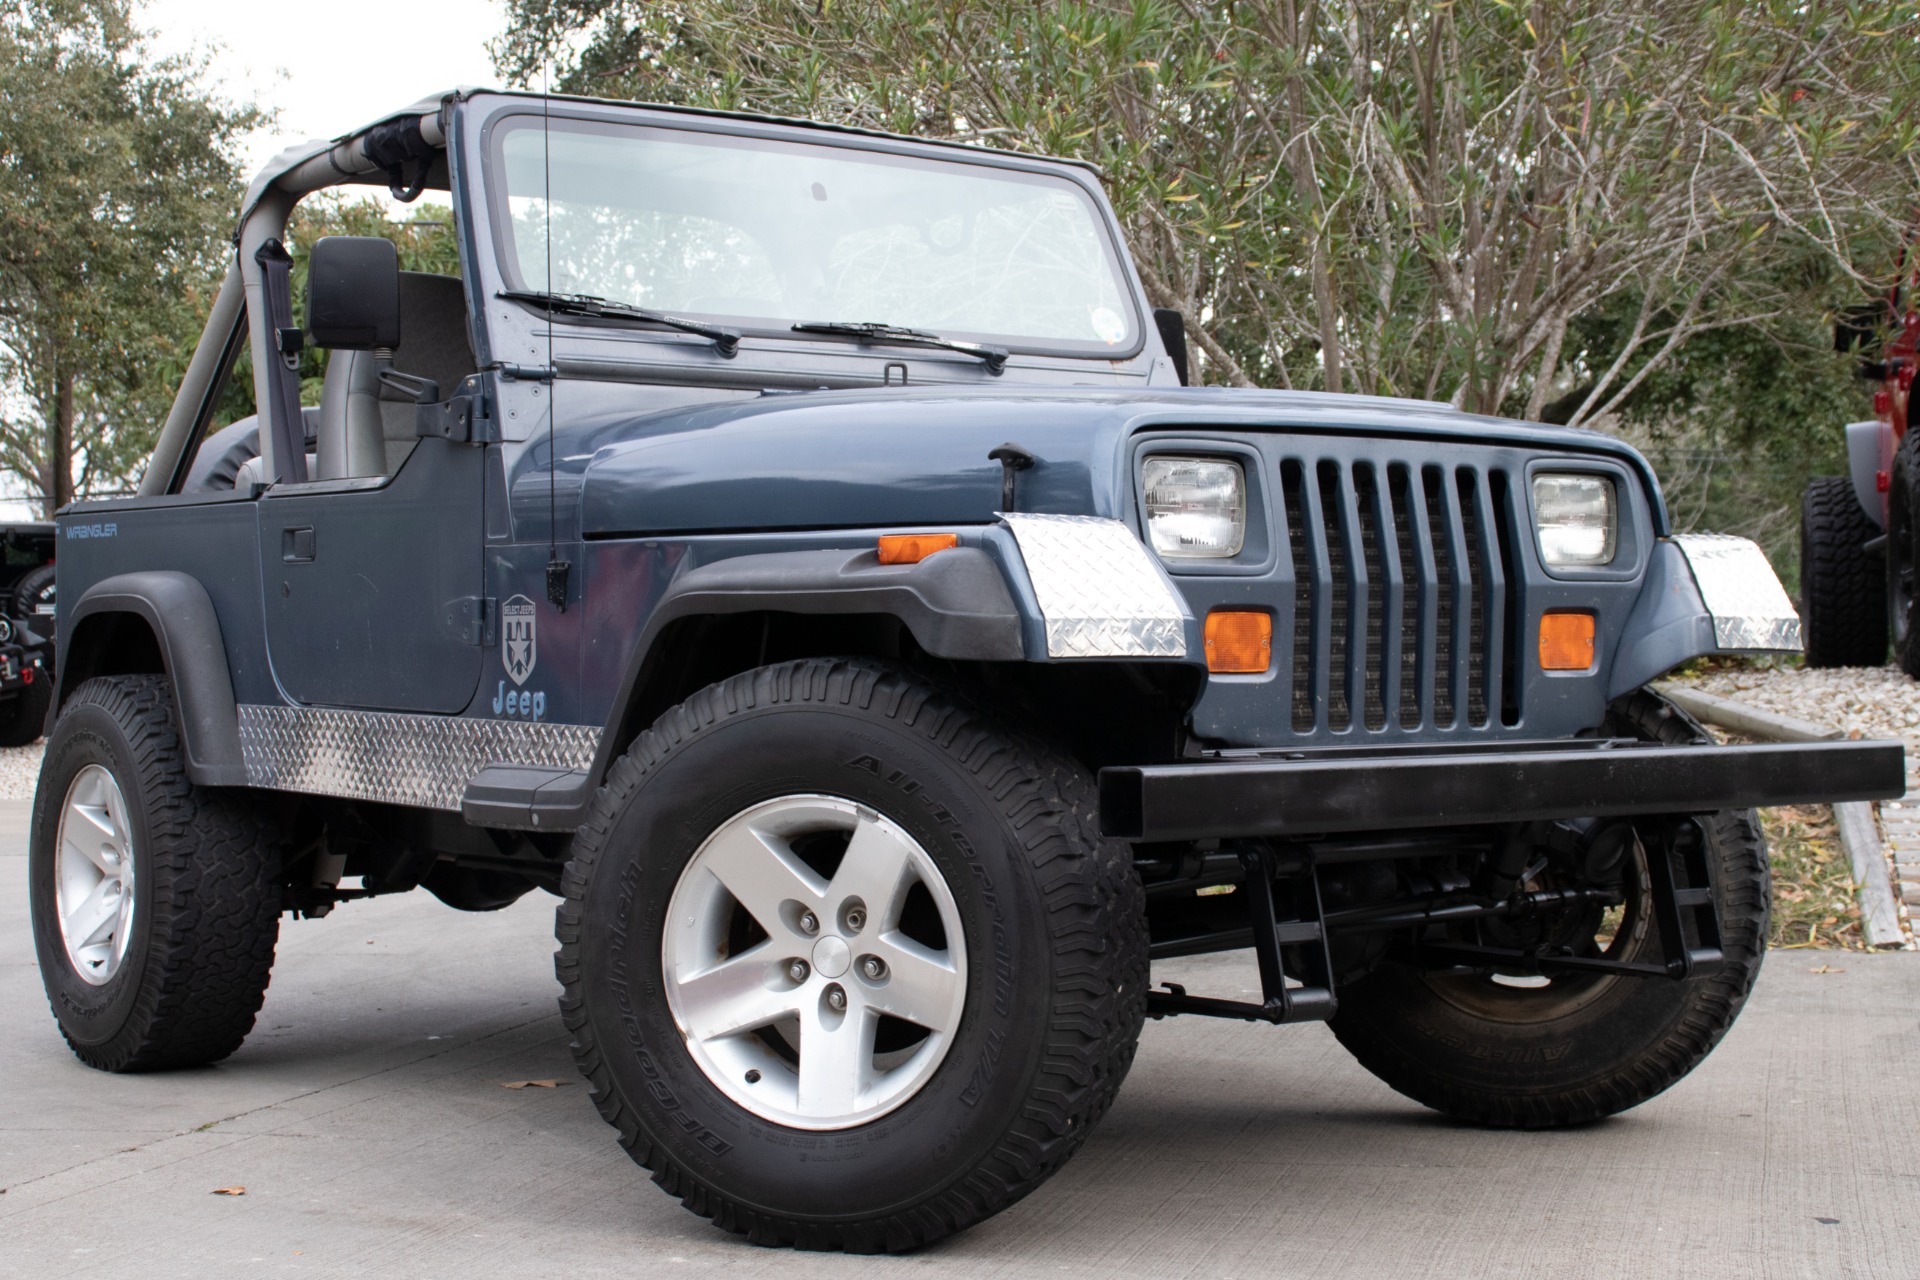 Used 1991 Jeep Wrangler For Sale ($8,995) | Select Jeeps Inc. Stock #146687